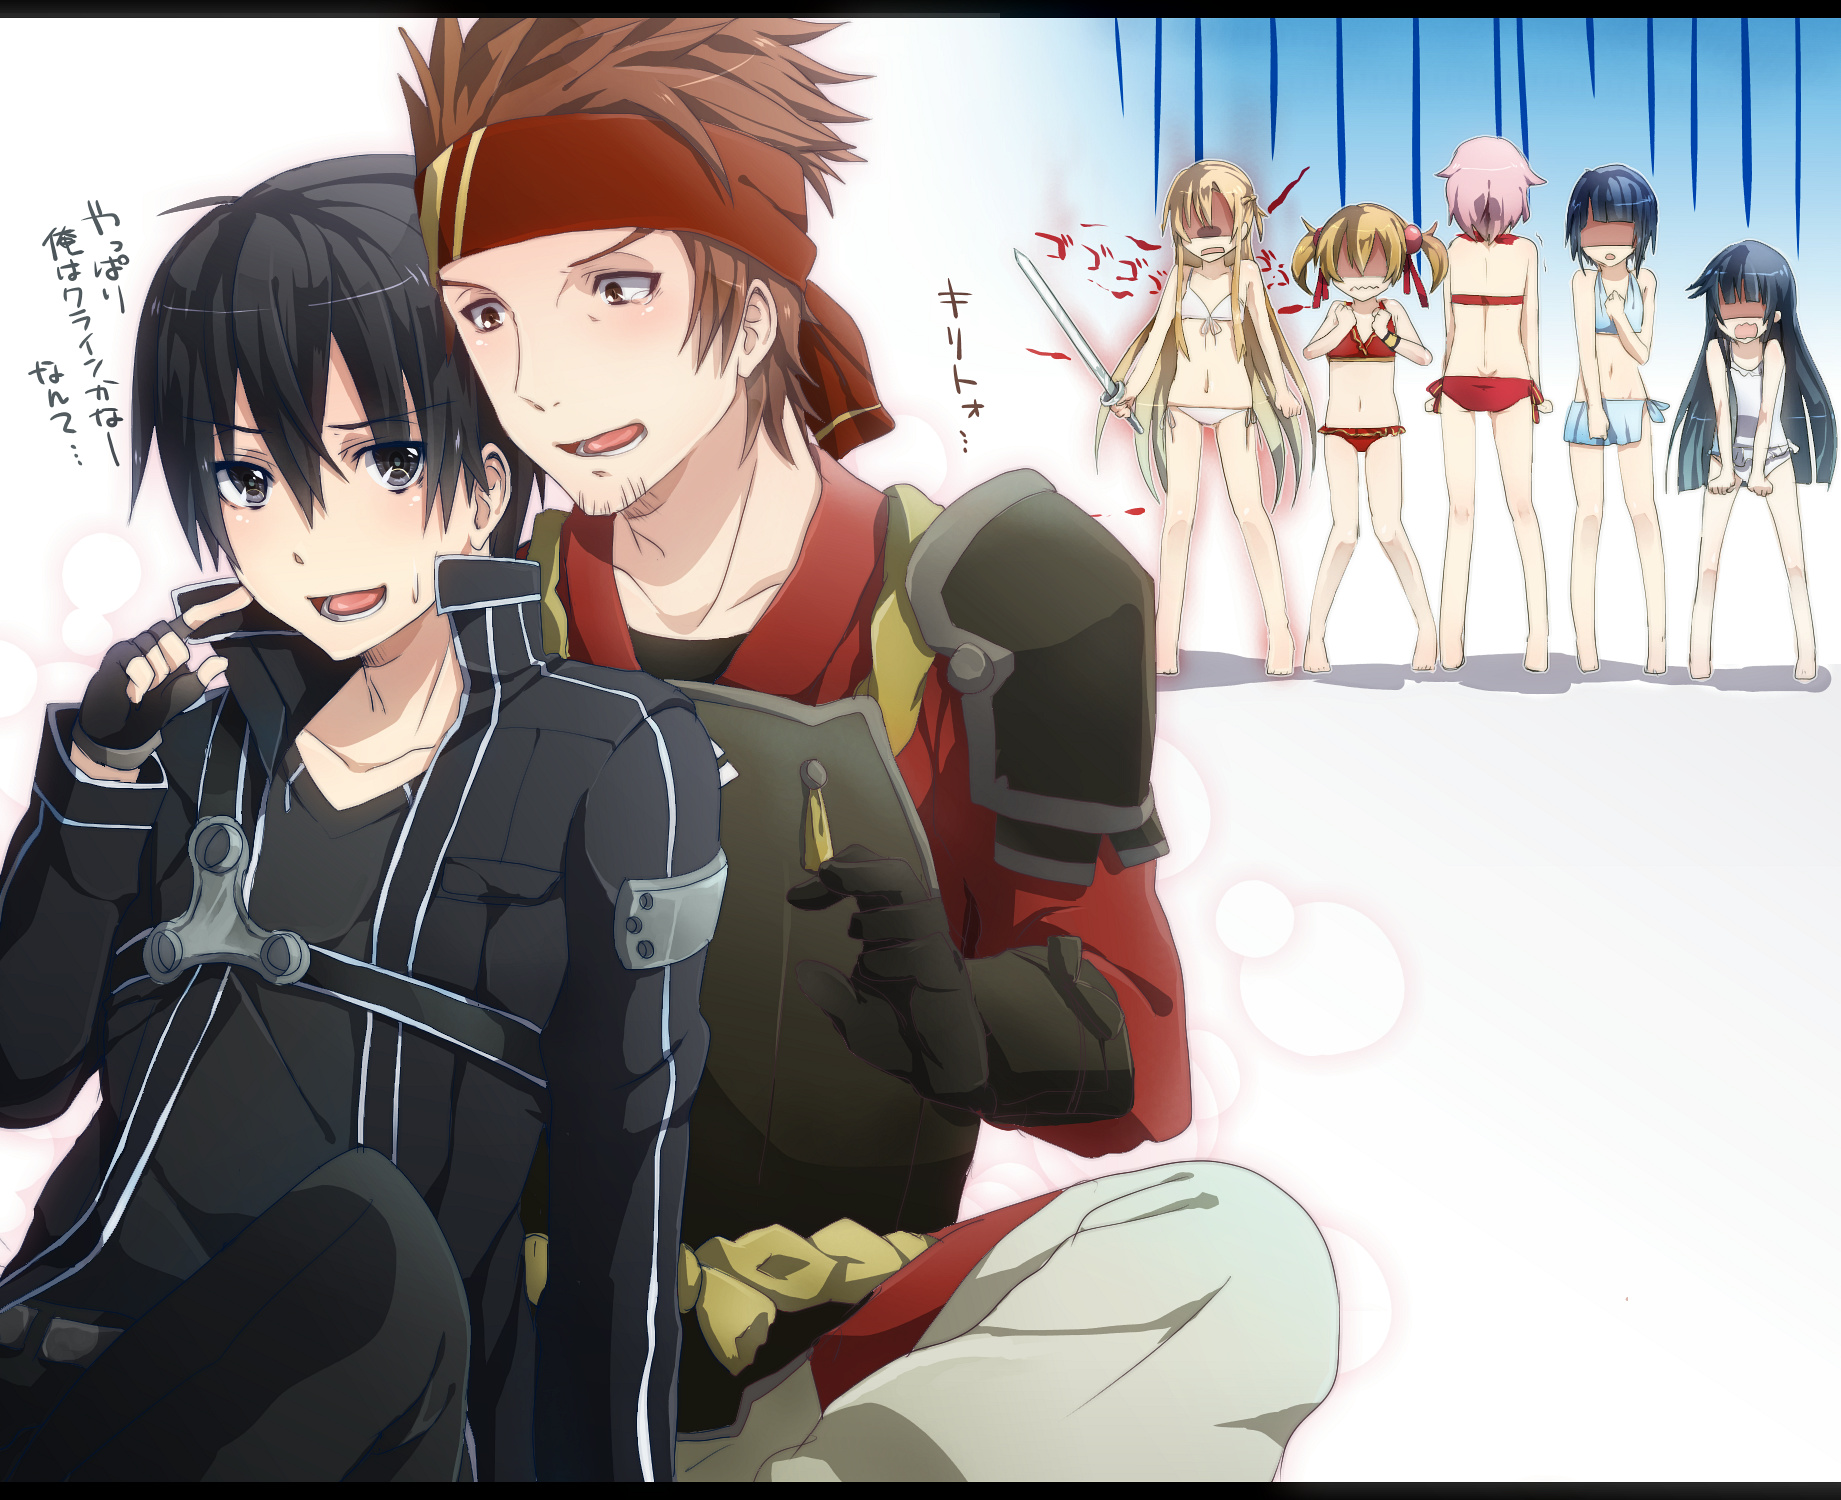 Sword Art Online 1 2 3 Let S Watch The “trap Into A Game” Anime… Mitch Anime Review Blog So